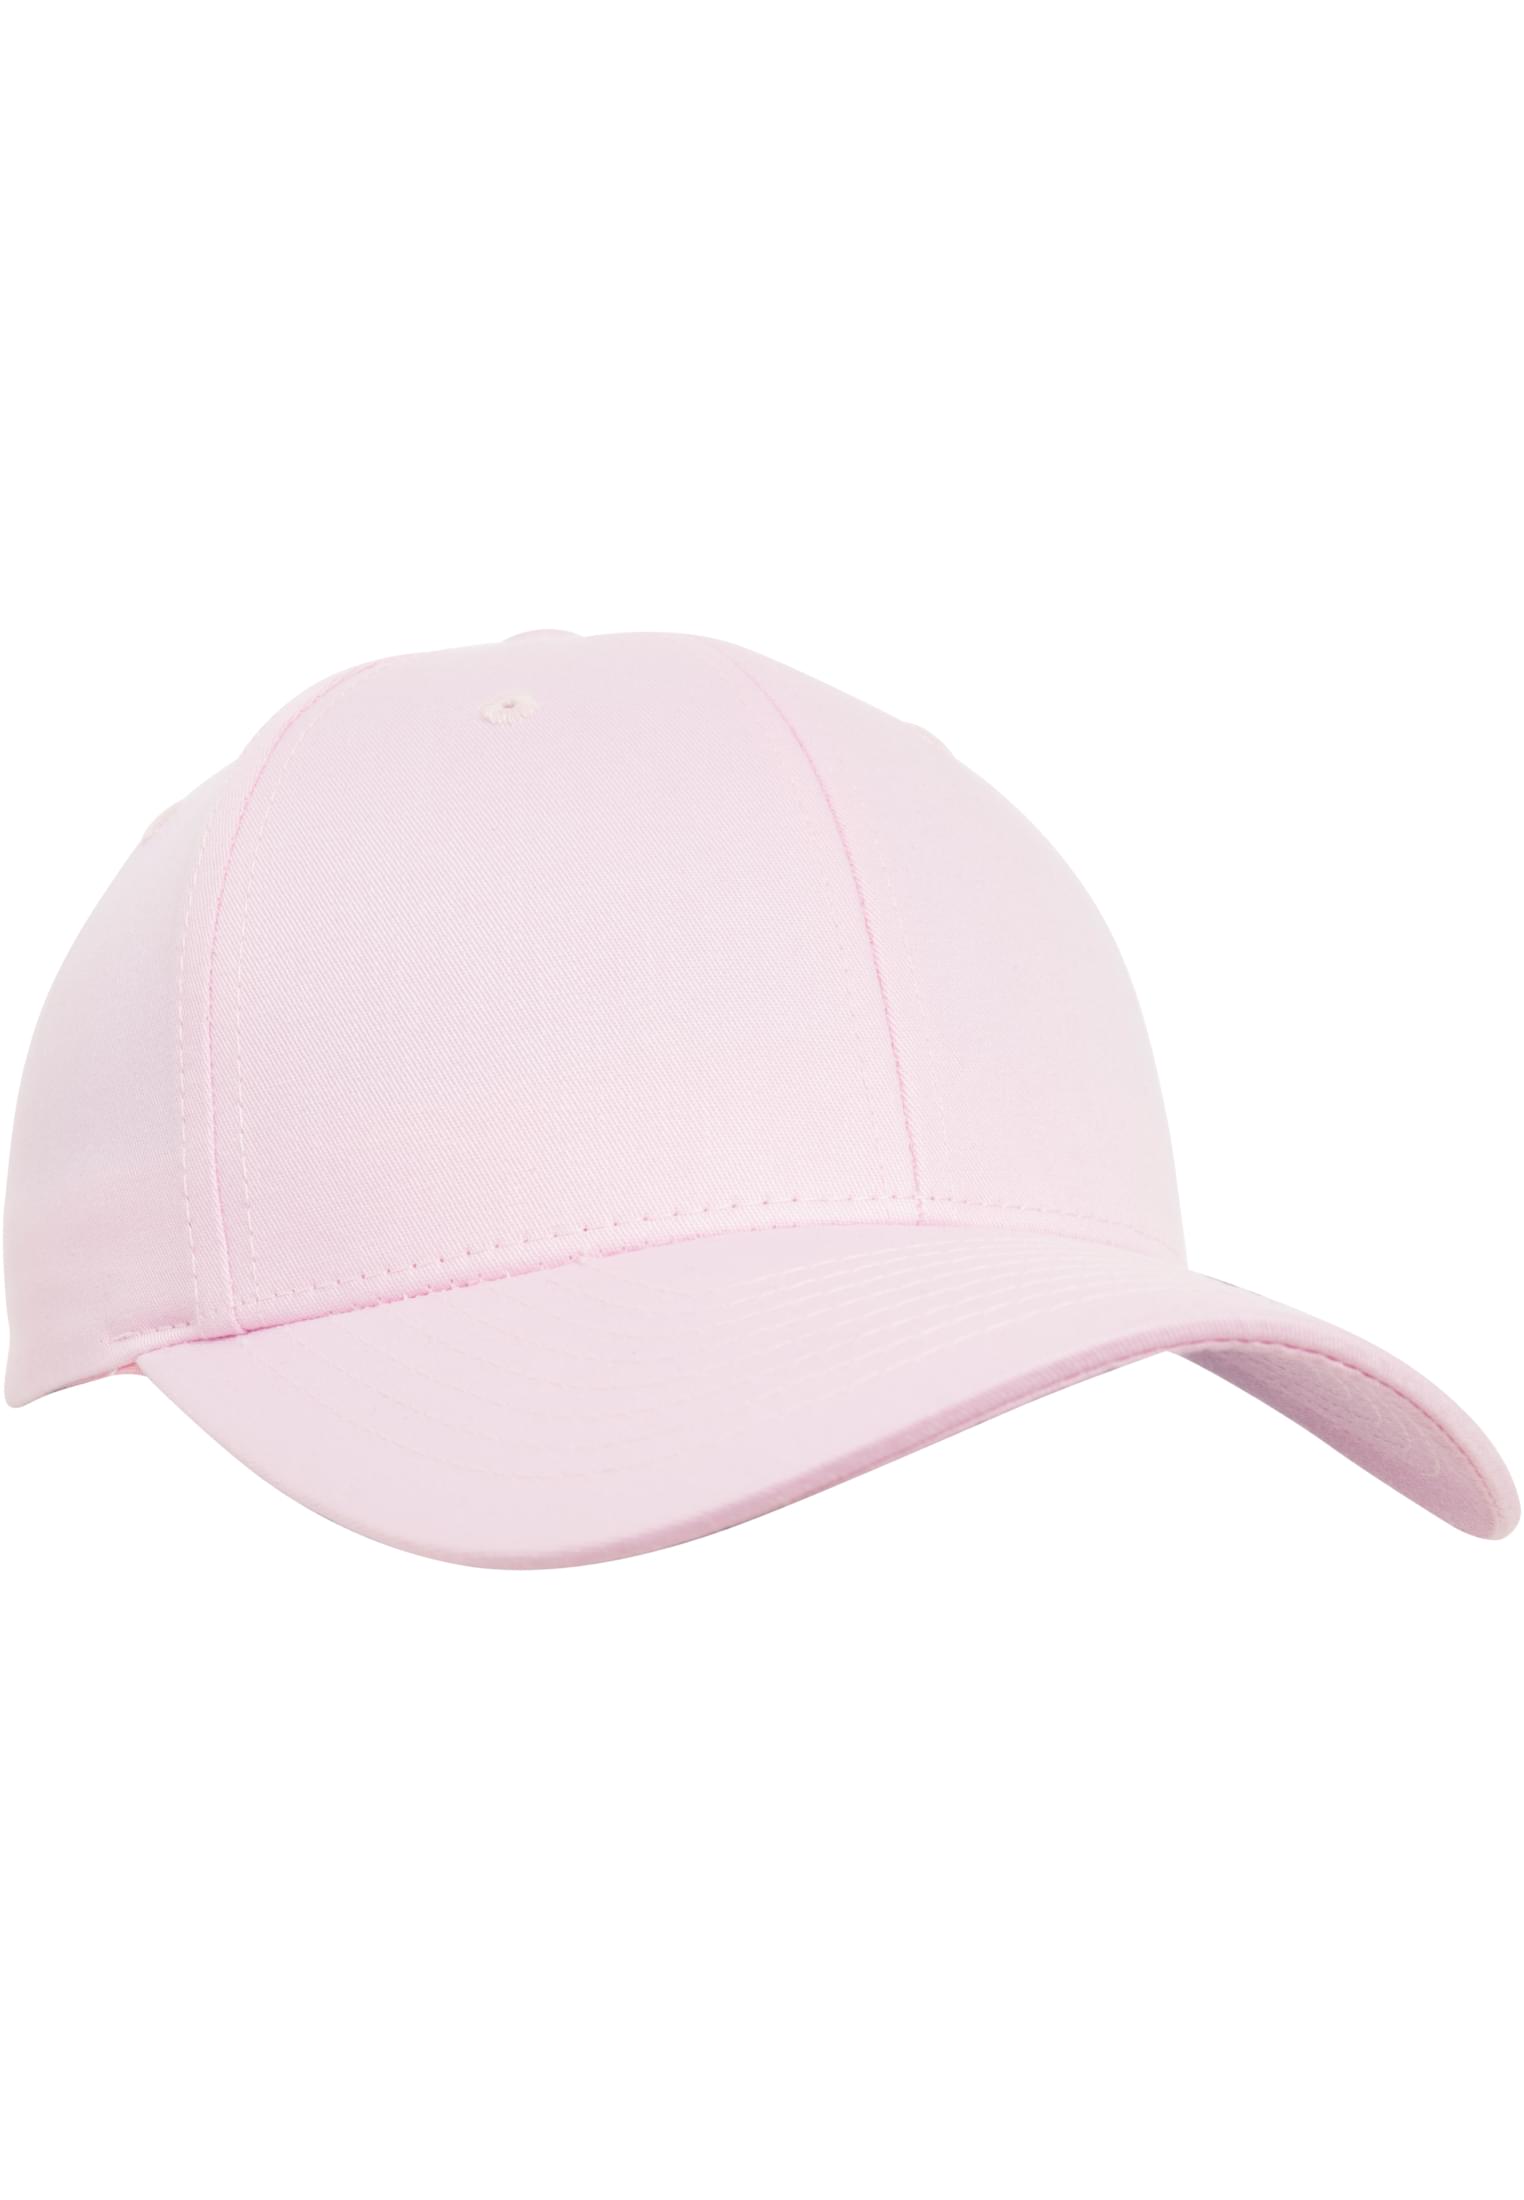 Snapback Curved Classic Snapback in Farbe pink